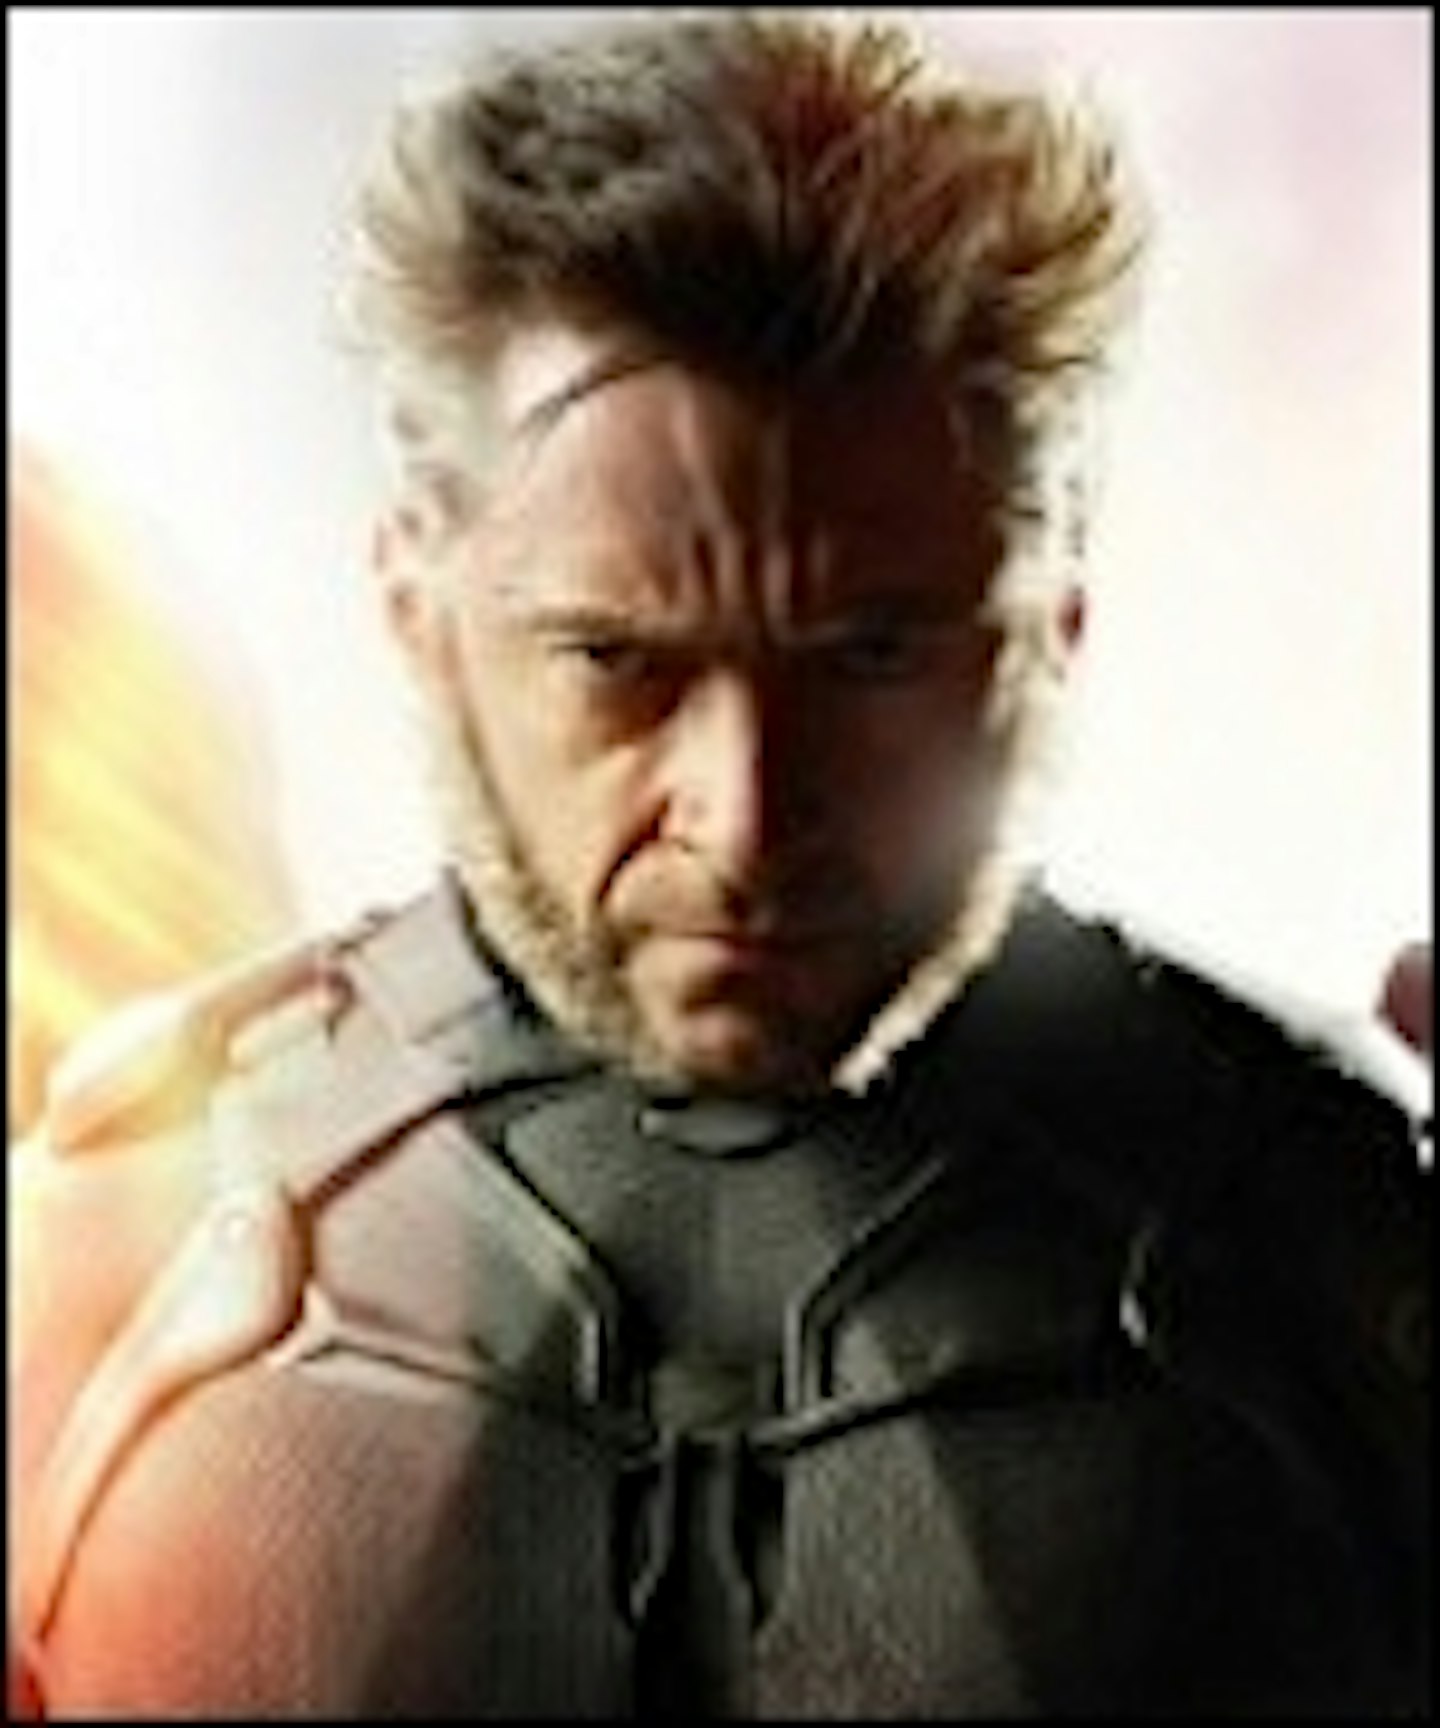 Latest Posters For X-Men: Days Of Future Past